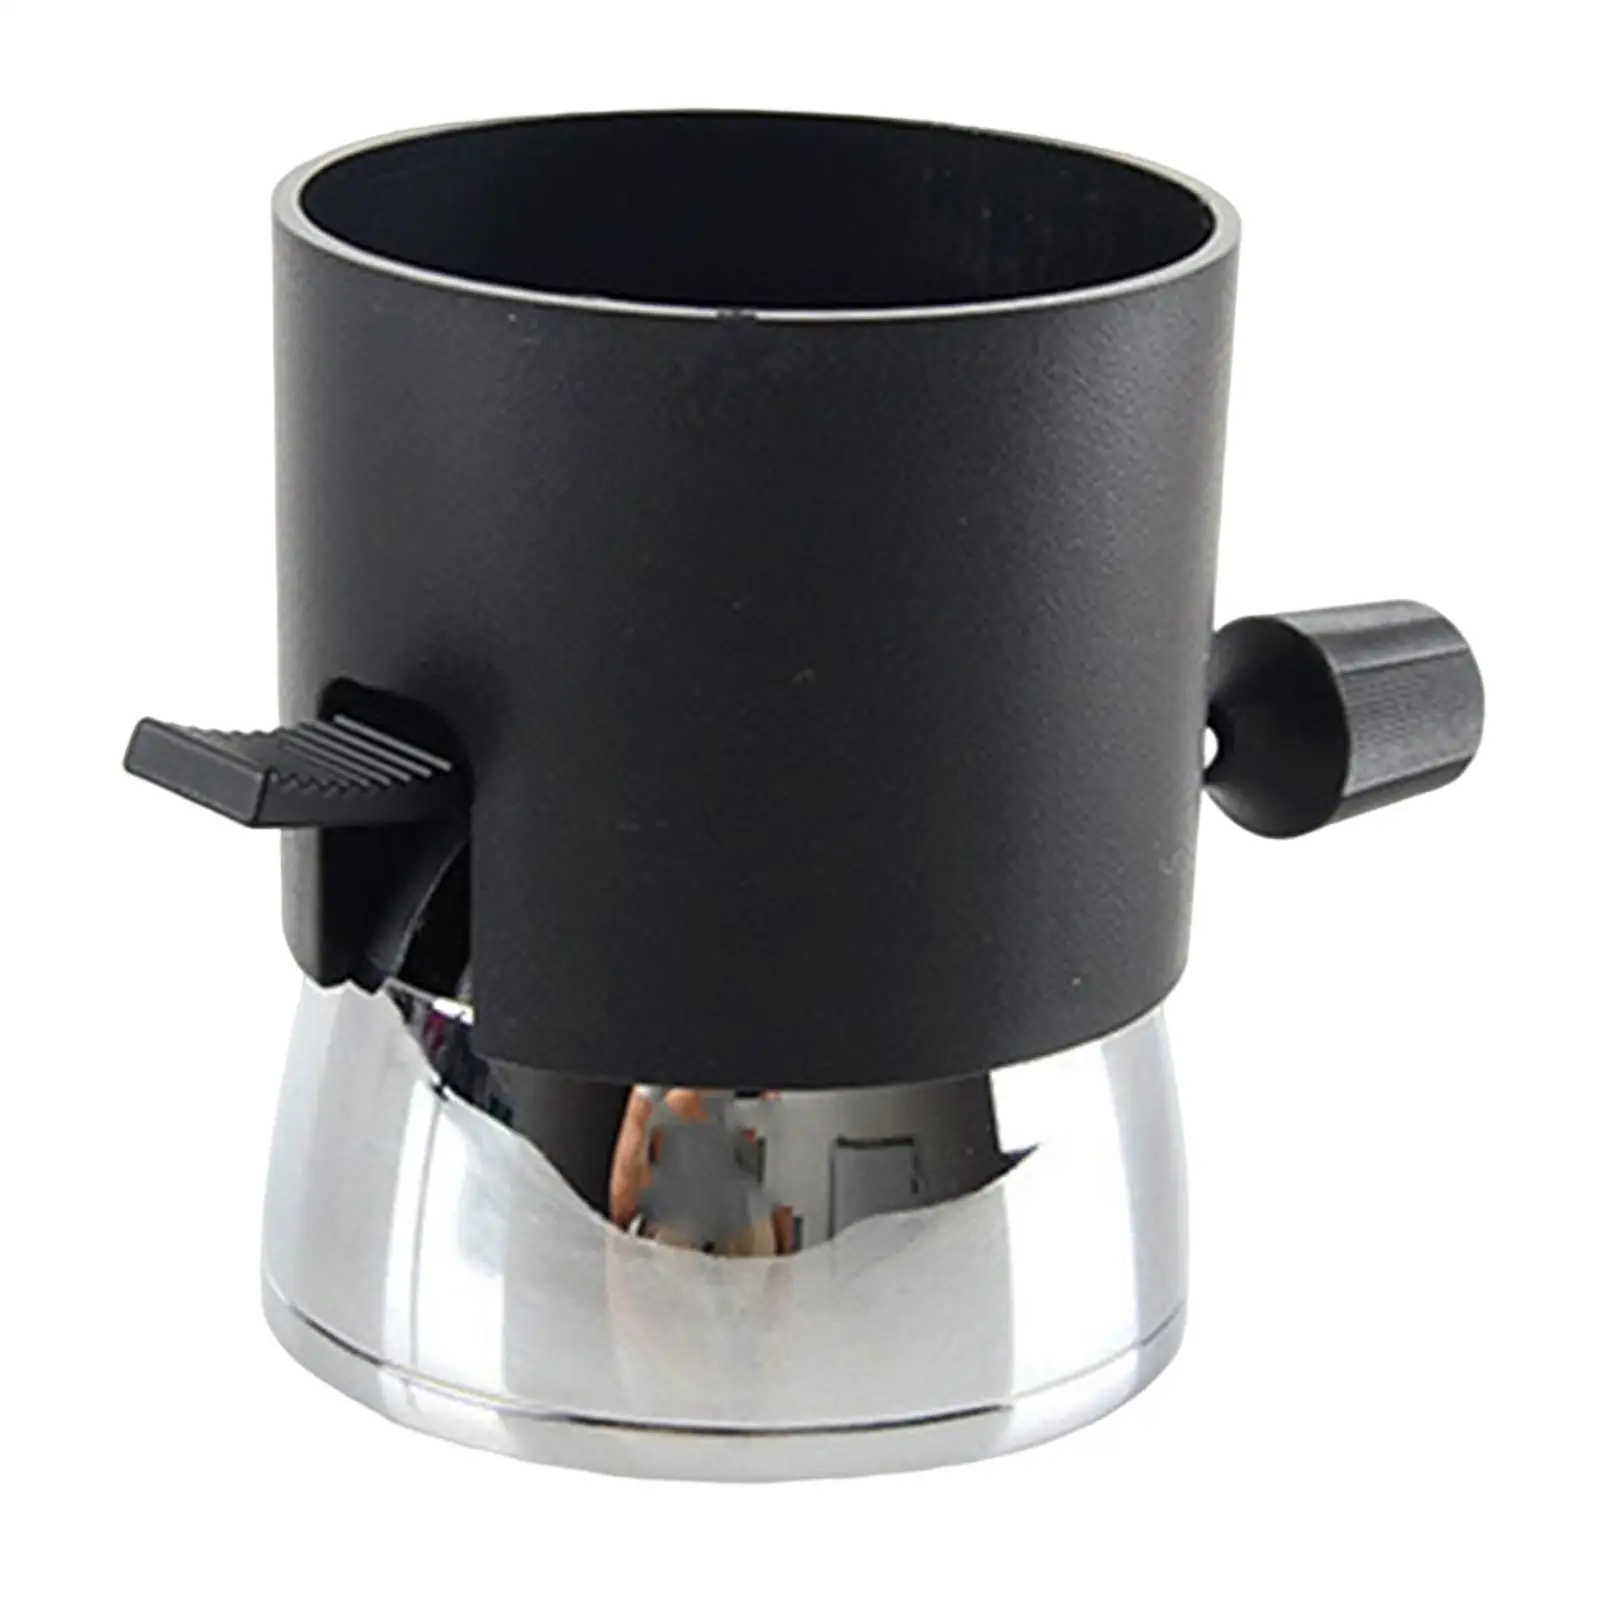 Mini Burner, Tabletop Siphon Coffee Maker, Portable Cooking Stove for Coffee